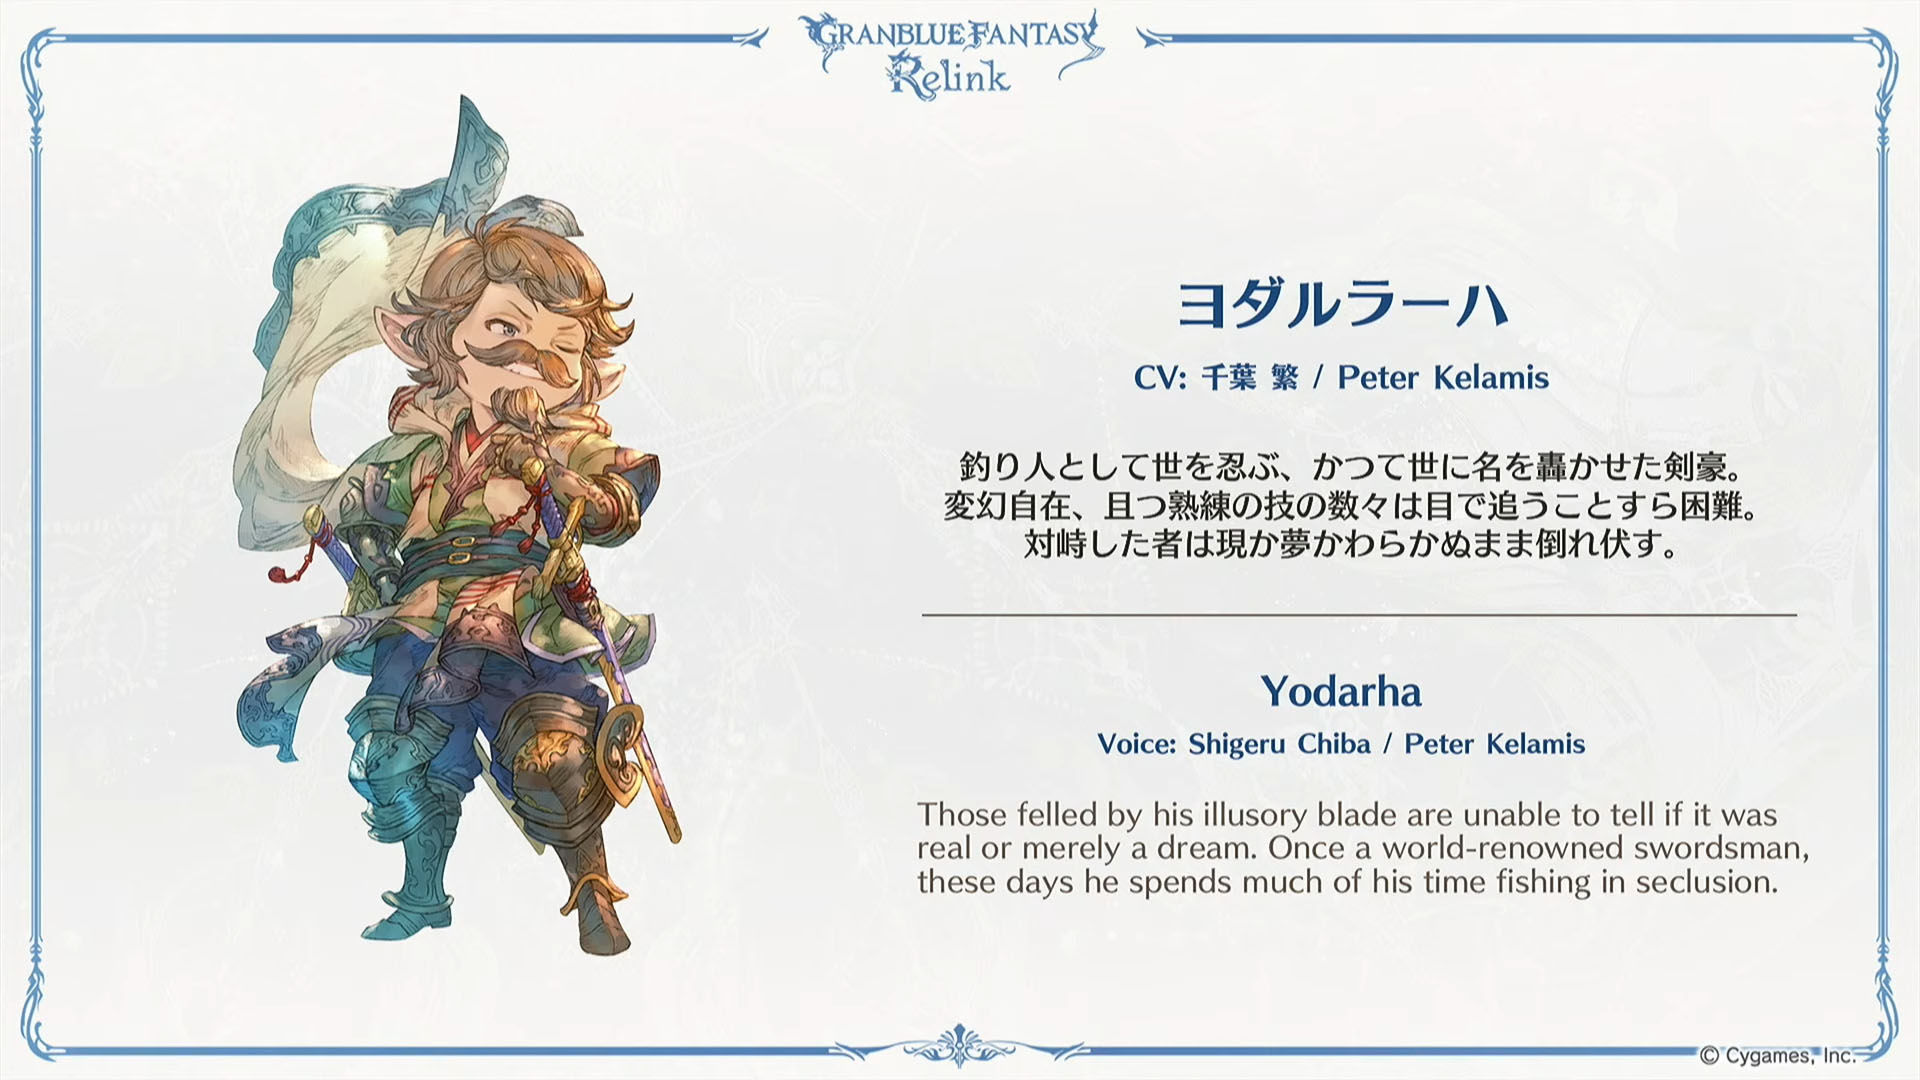 Id, CHARACTERS, Granblue Fantasy: Relink